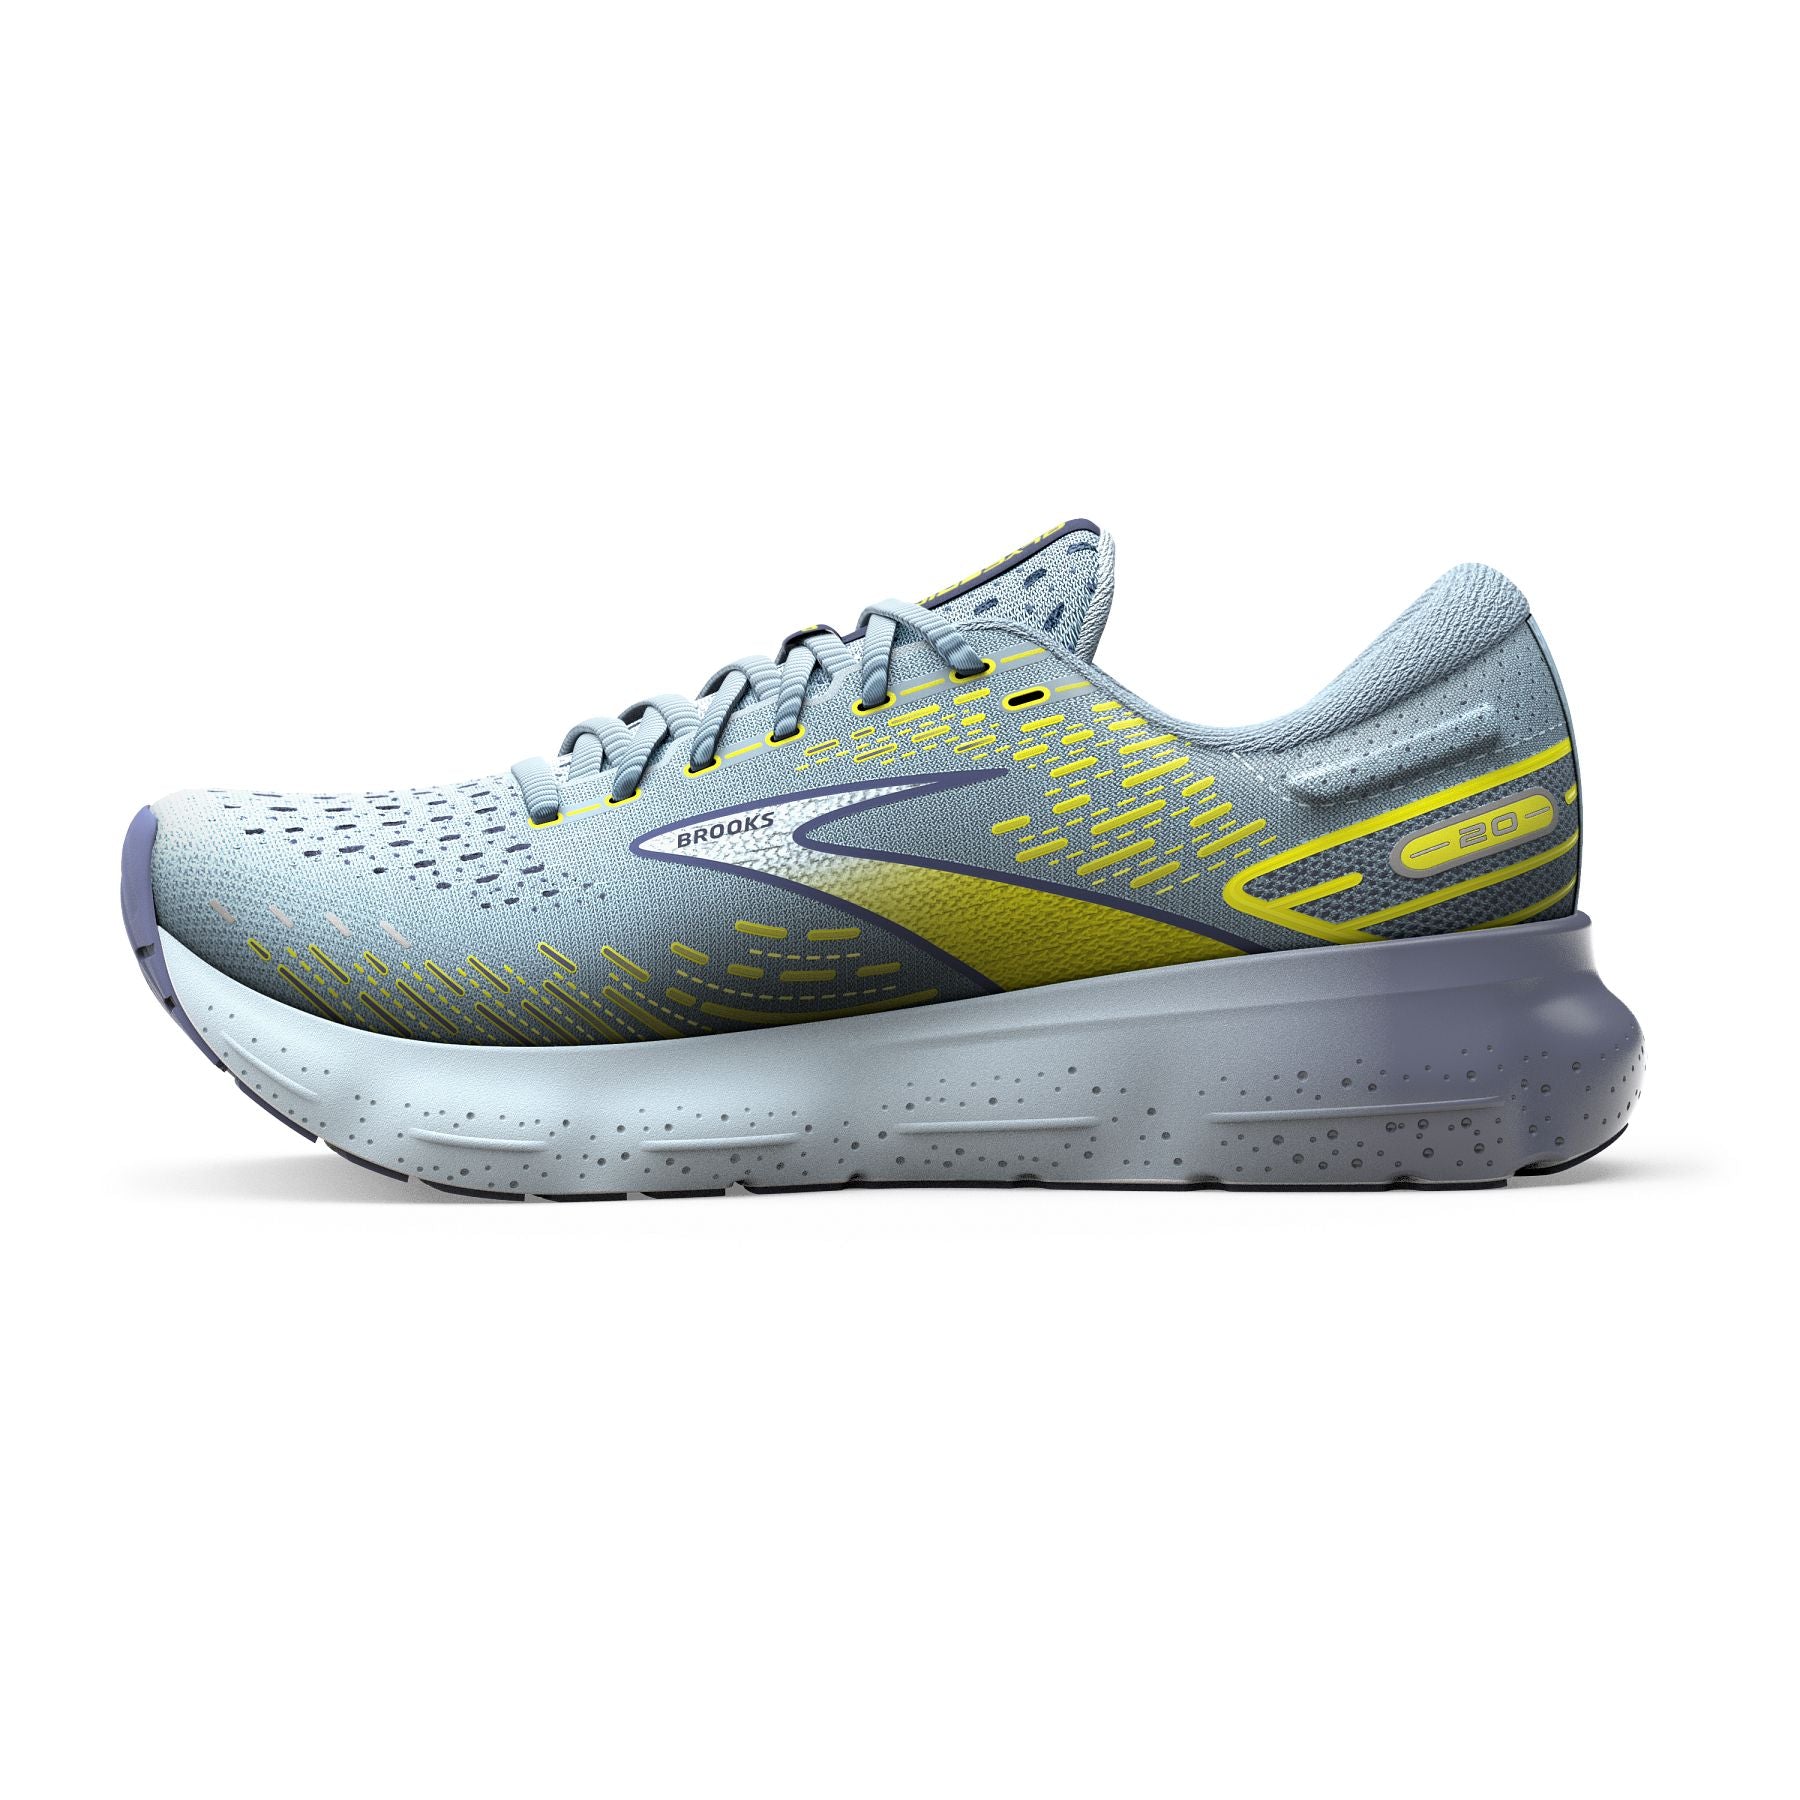 Medial view of the Men's Glycerin 20 by Brook's in the color Blue/Crown Blue/Sulphur